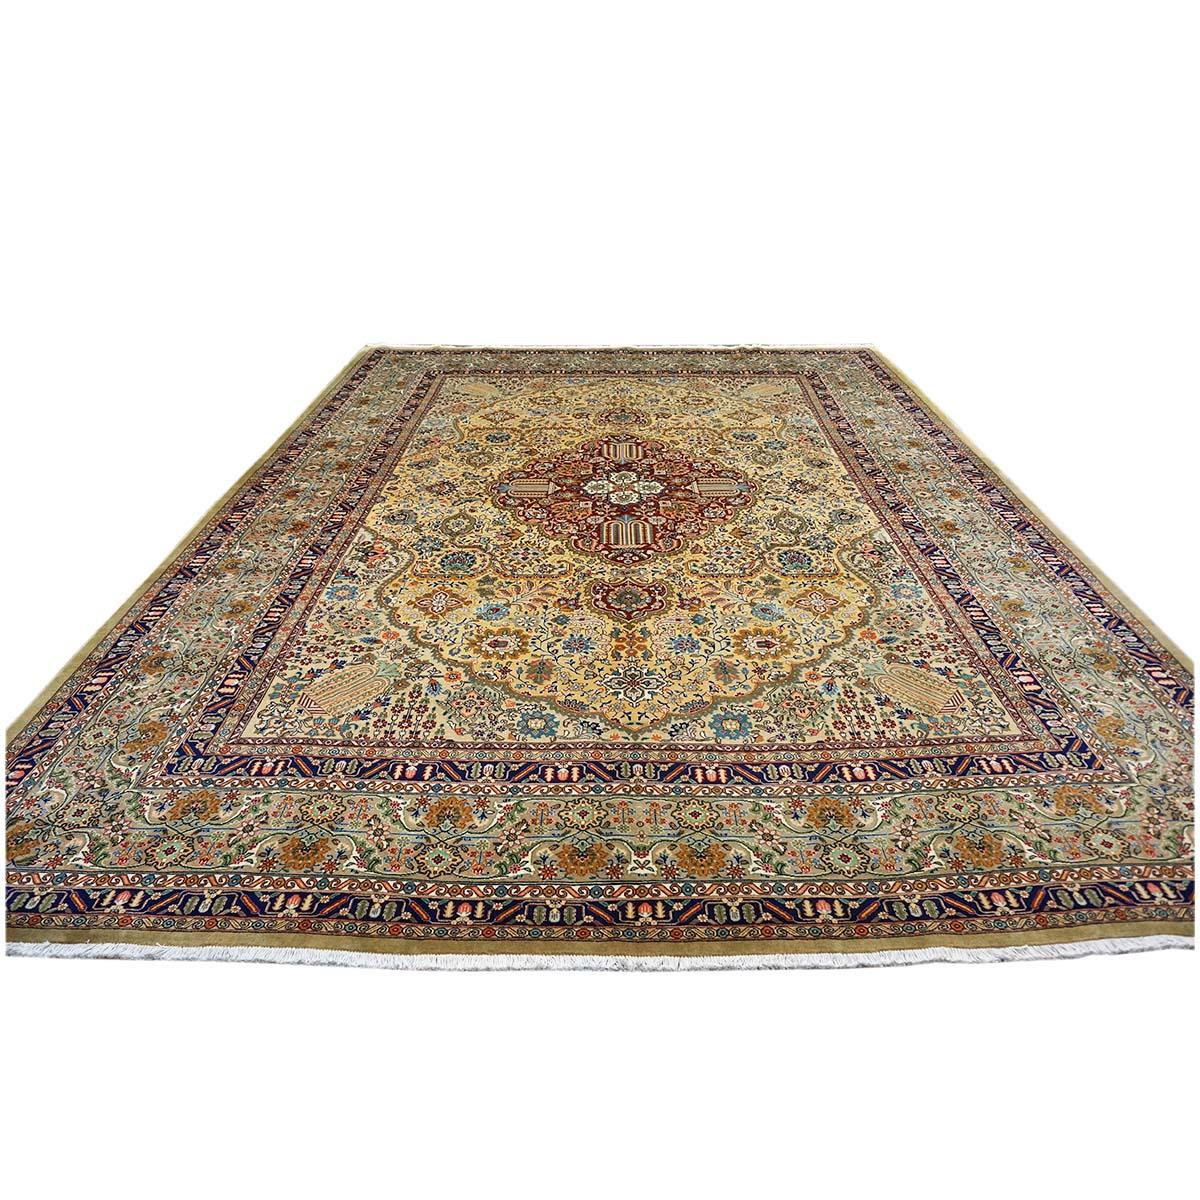 Wool Antique Persian Tabriz 10x13 Tan, Taupe, Navy, & Gold Handmade Area Rug For Sale